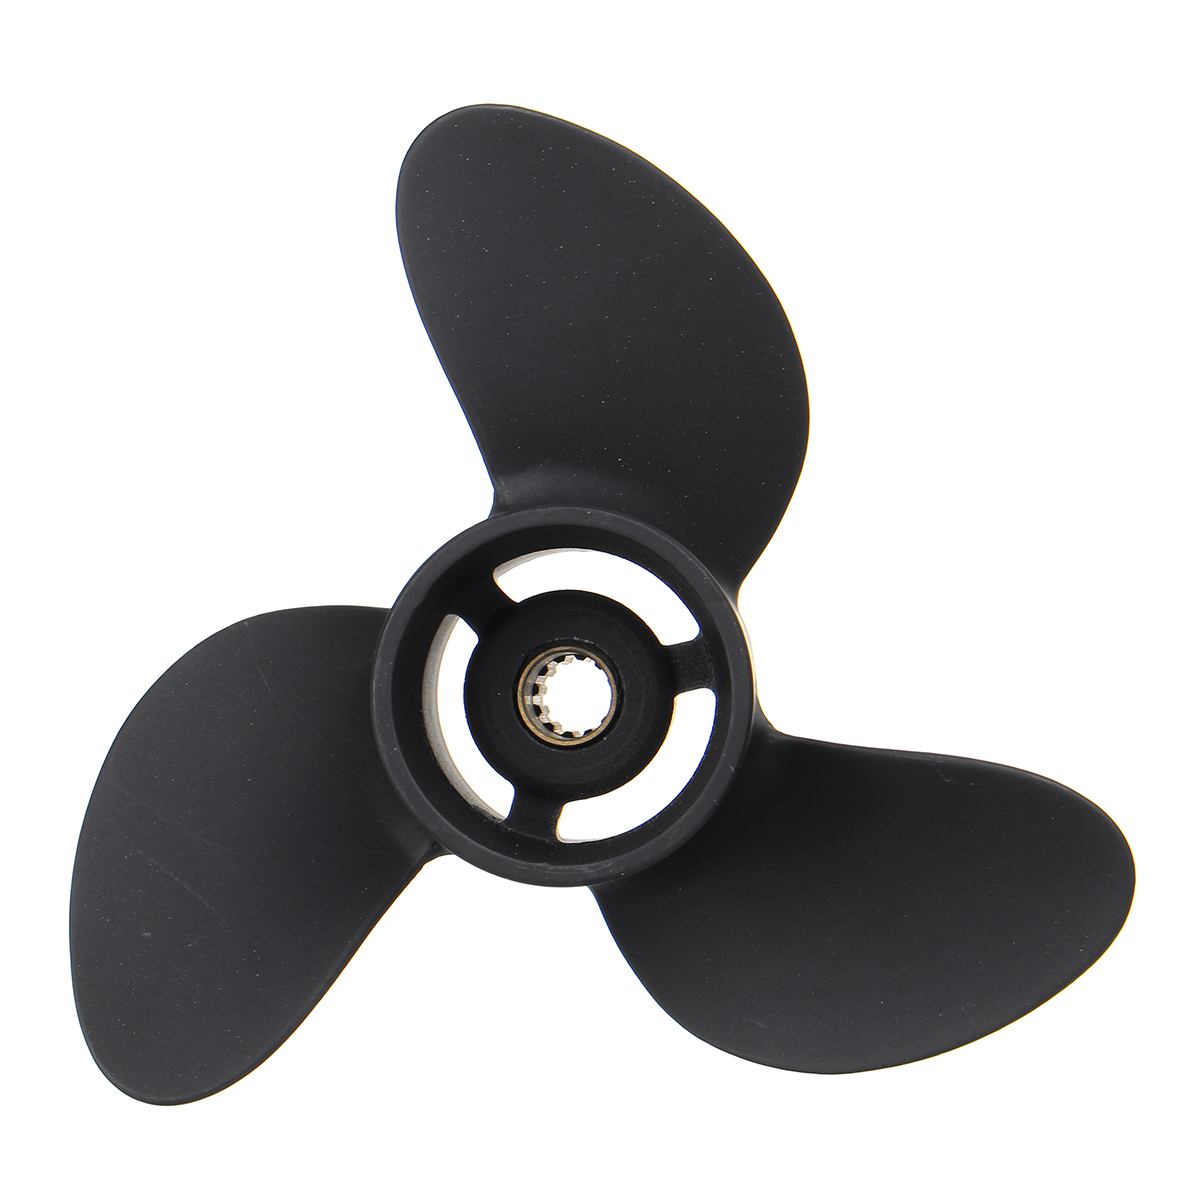 7.8 x 9'' Marine Outboard Propeller For Tohatsu/Nissan/Mercury 4-6HP 369B645181 / 48-812951A02 Aluminum Alloy 12 Spline Tooth